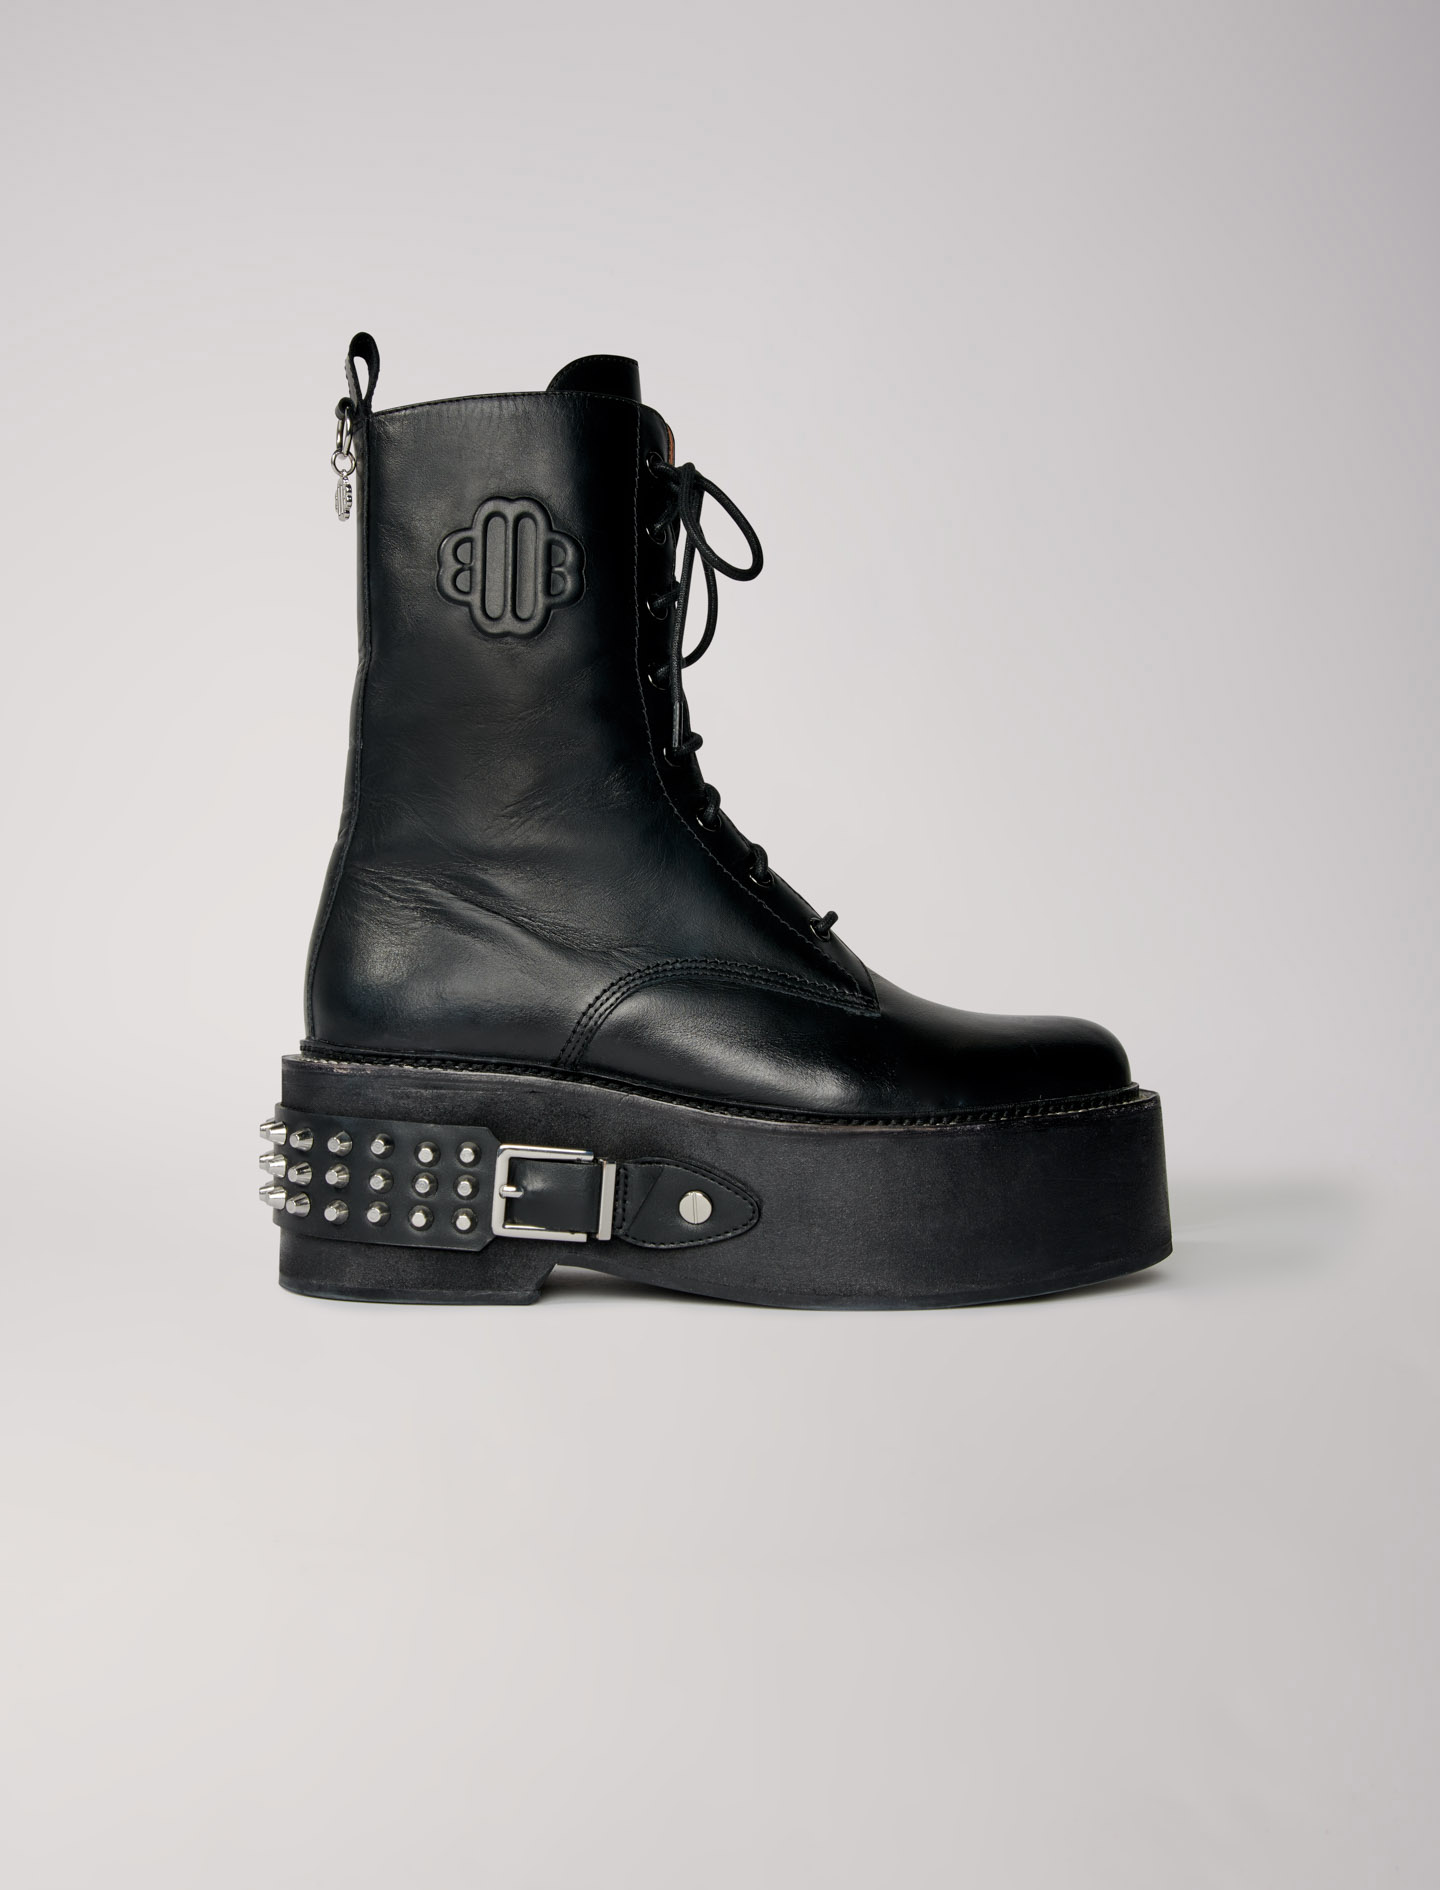 Maje Woman's cotton Outer sole: Combat boots with punk details for Fall/Winter, in color Black / Black